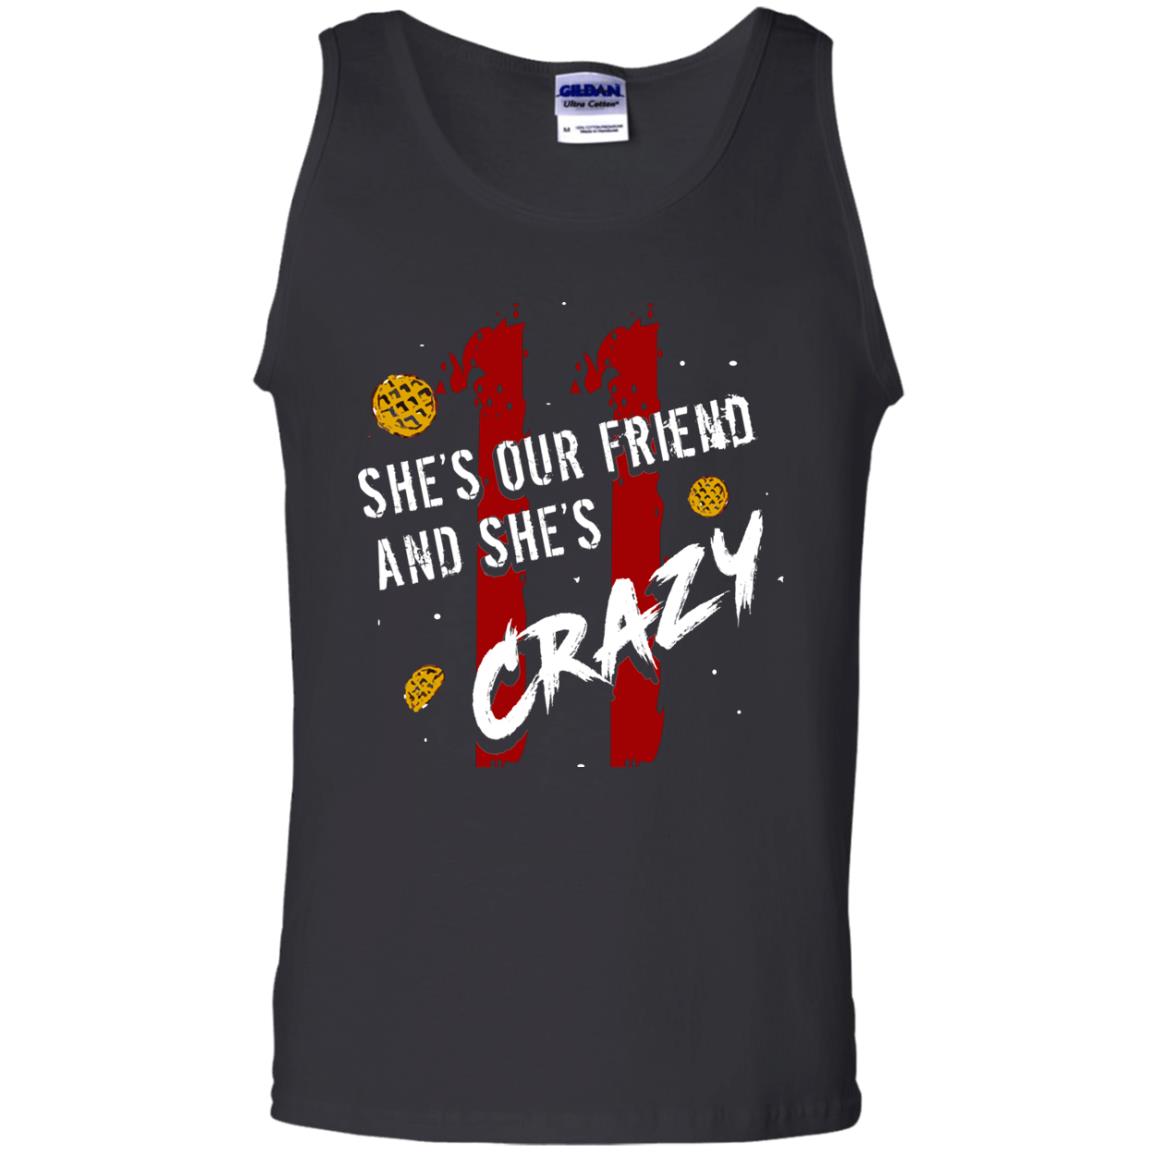 Friend T-shirt She's Our Friend And She's Crazy